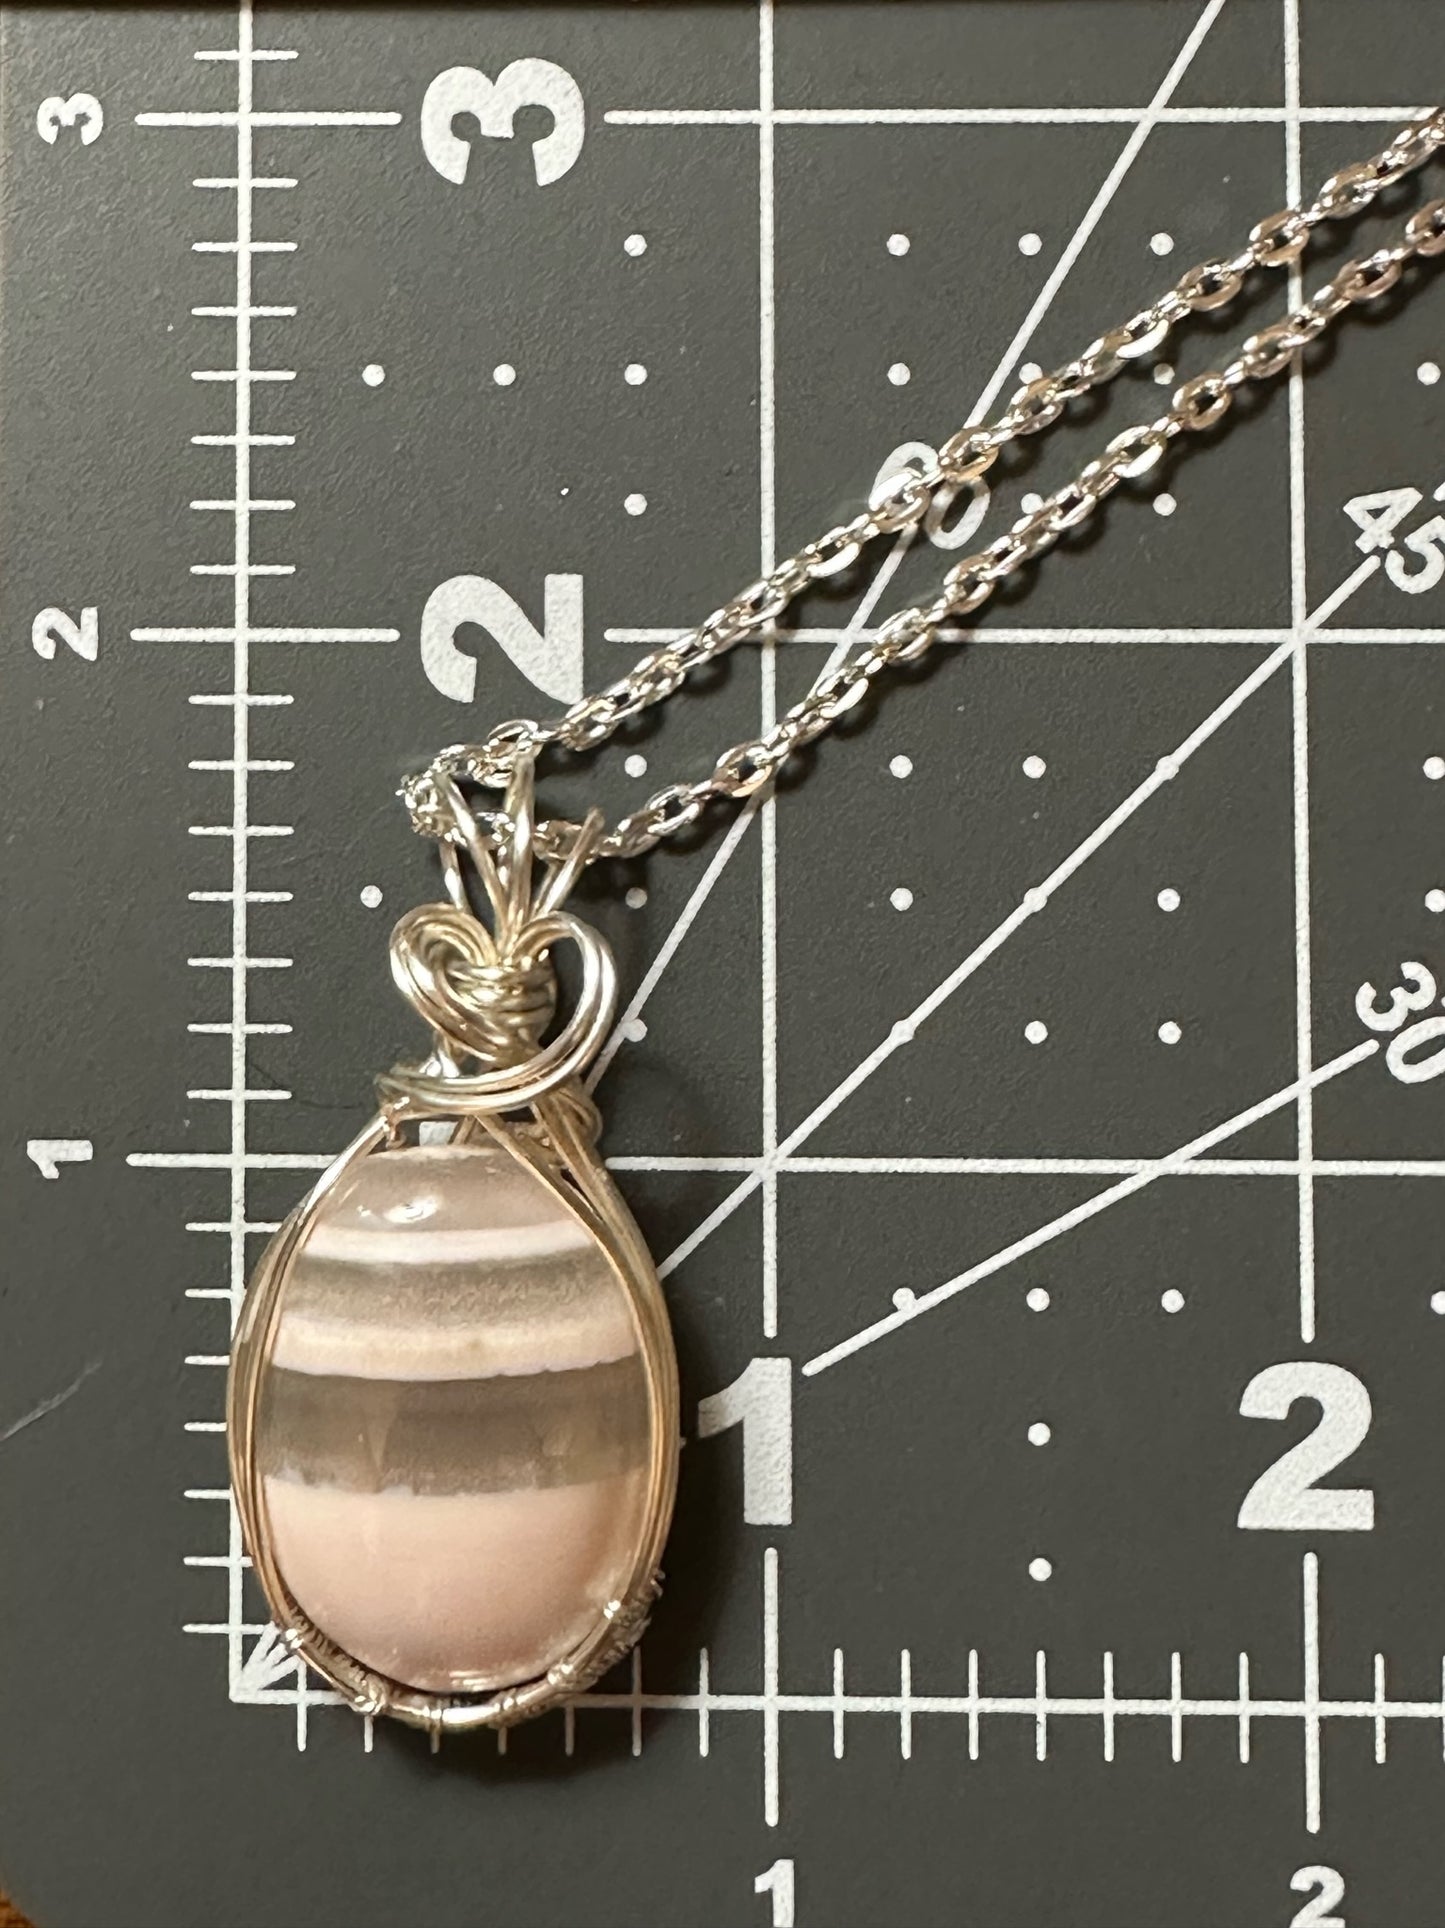 Handmade Wire Wrapped Pink Stripe Agate Oval Pendant